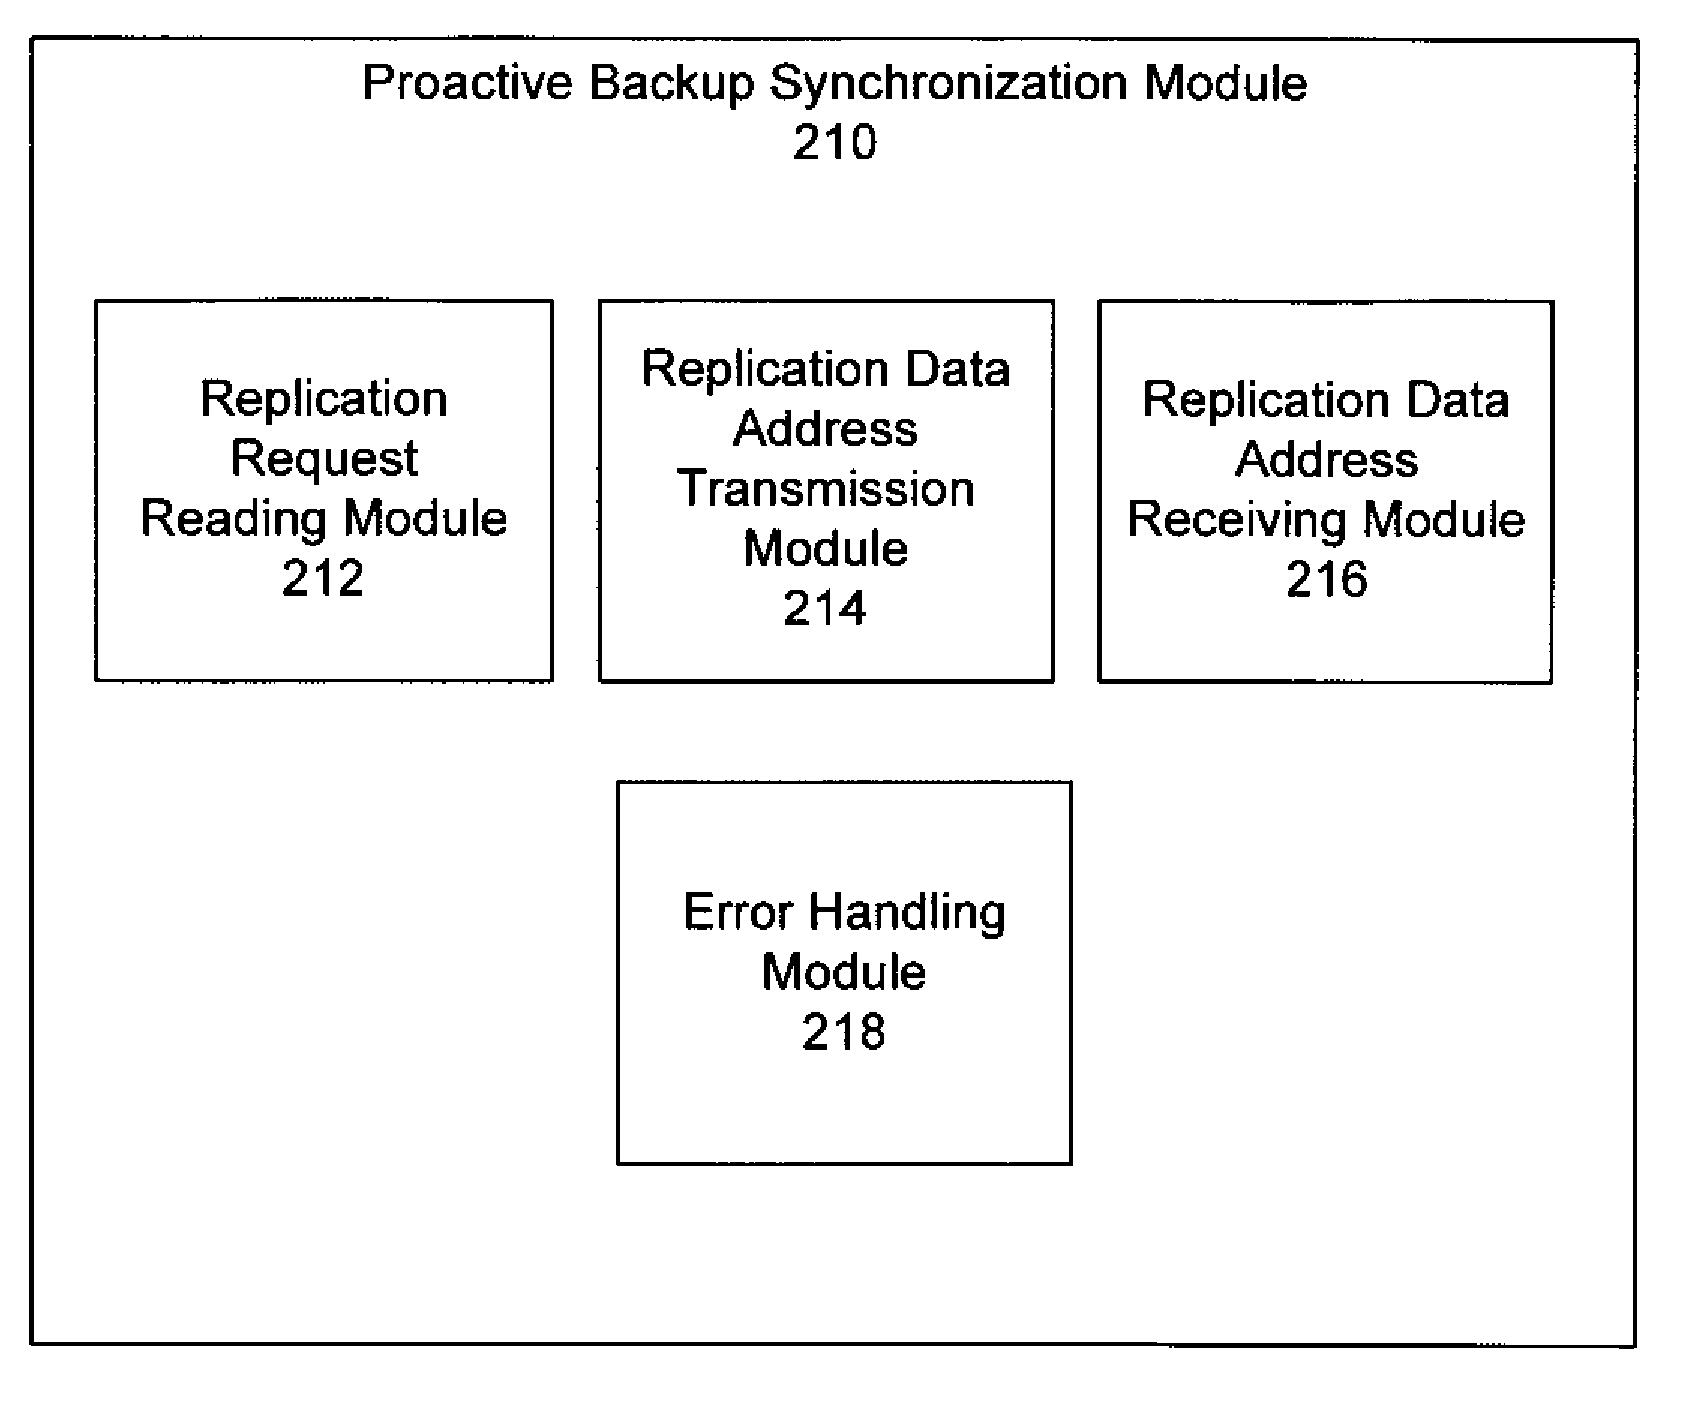 Techniques for proactive synchronization of backups on replication targets